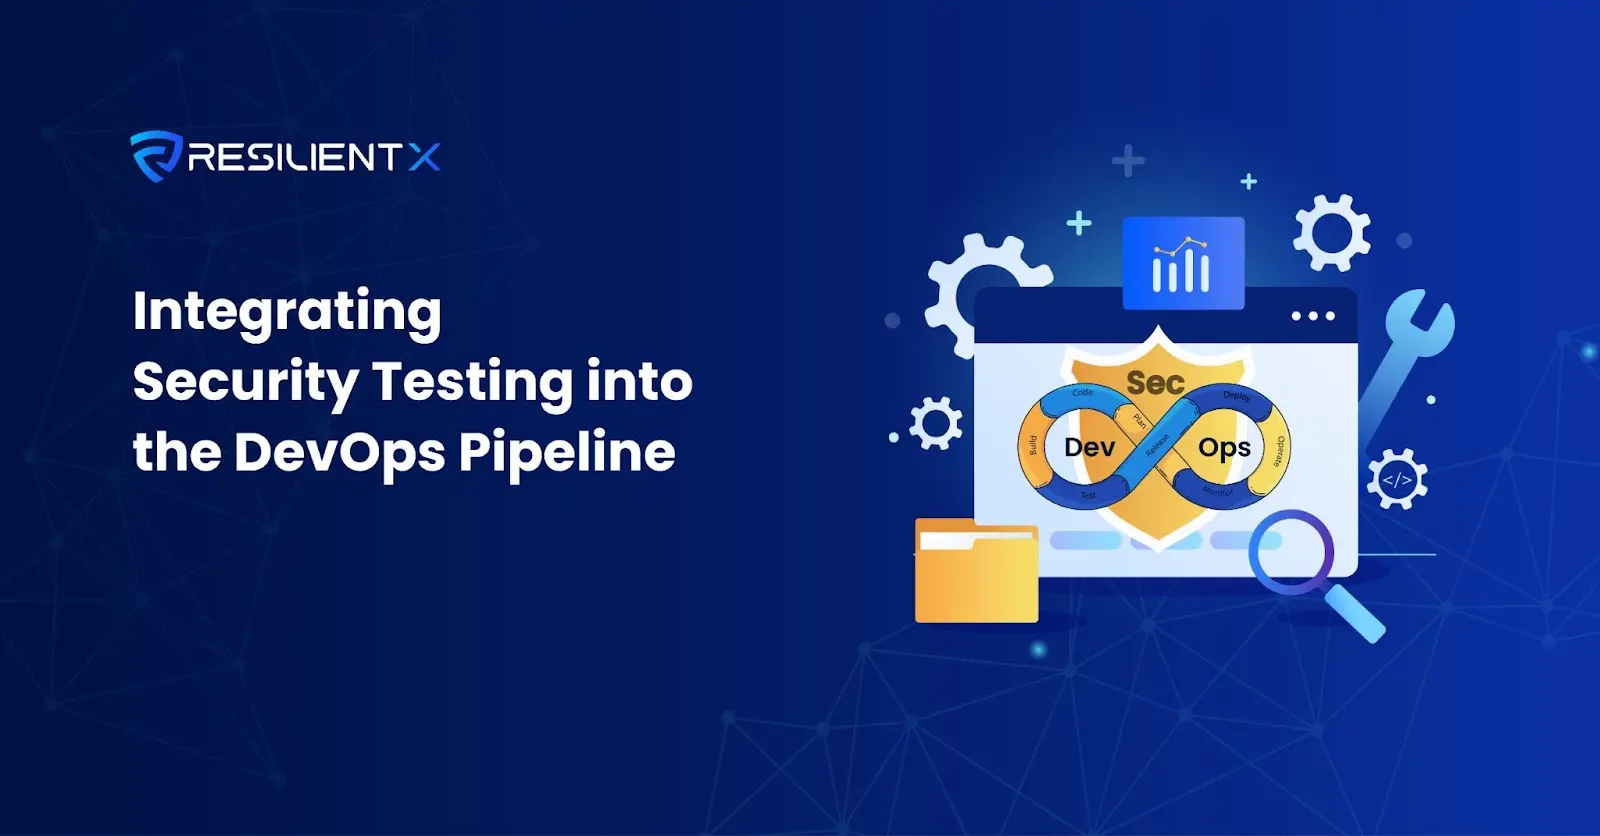 Integrating Application Security Testing into the DevOps Pipeline